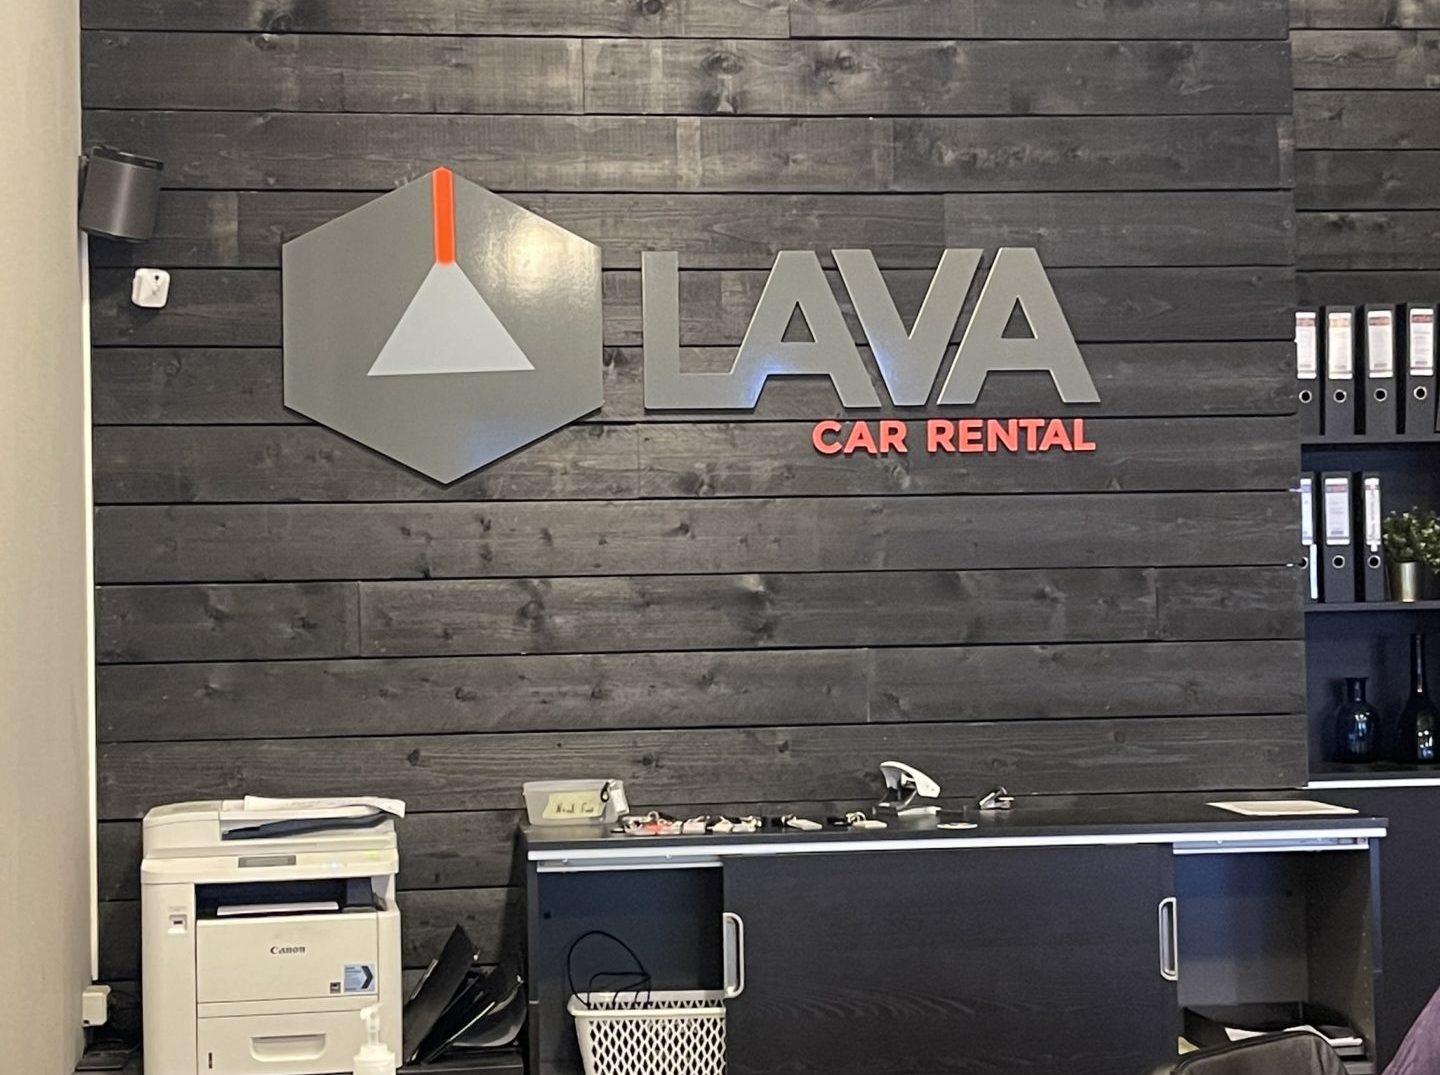 The front desk at Lava Car Rental in Iceland.